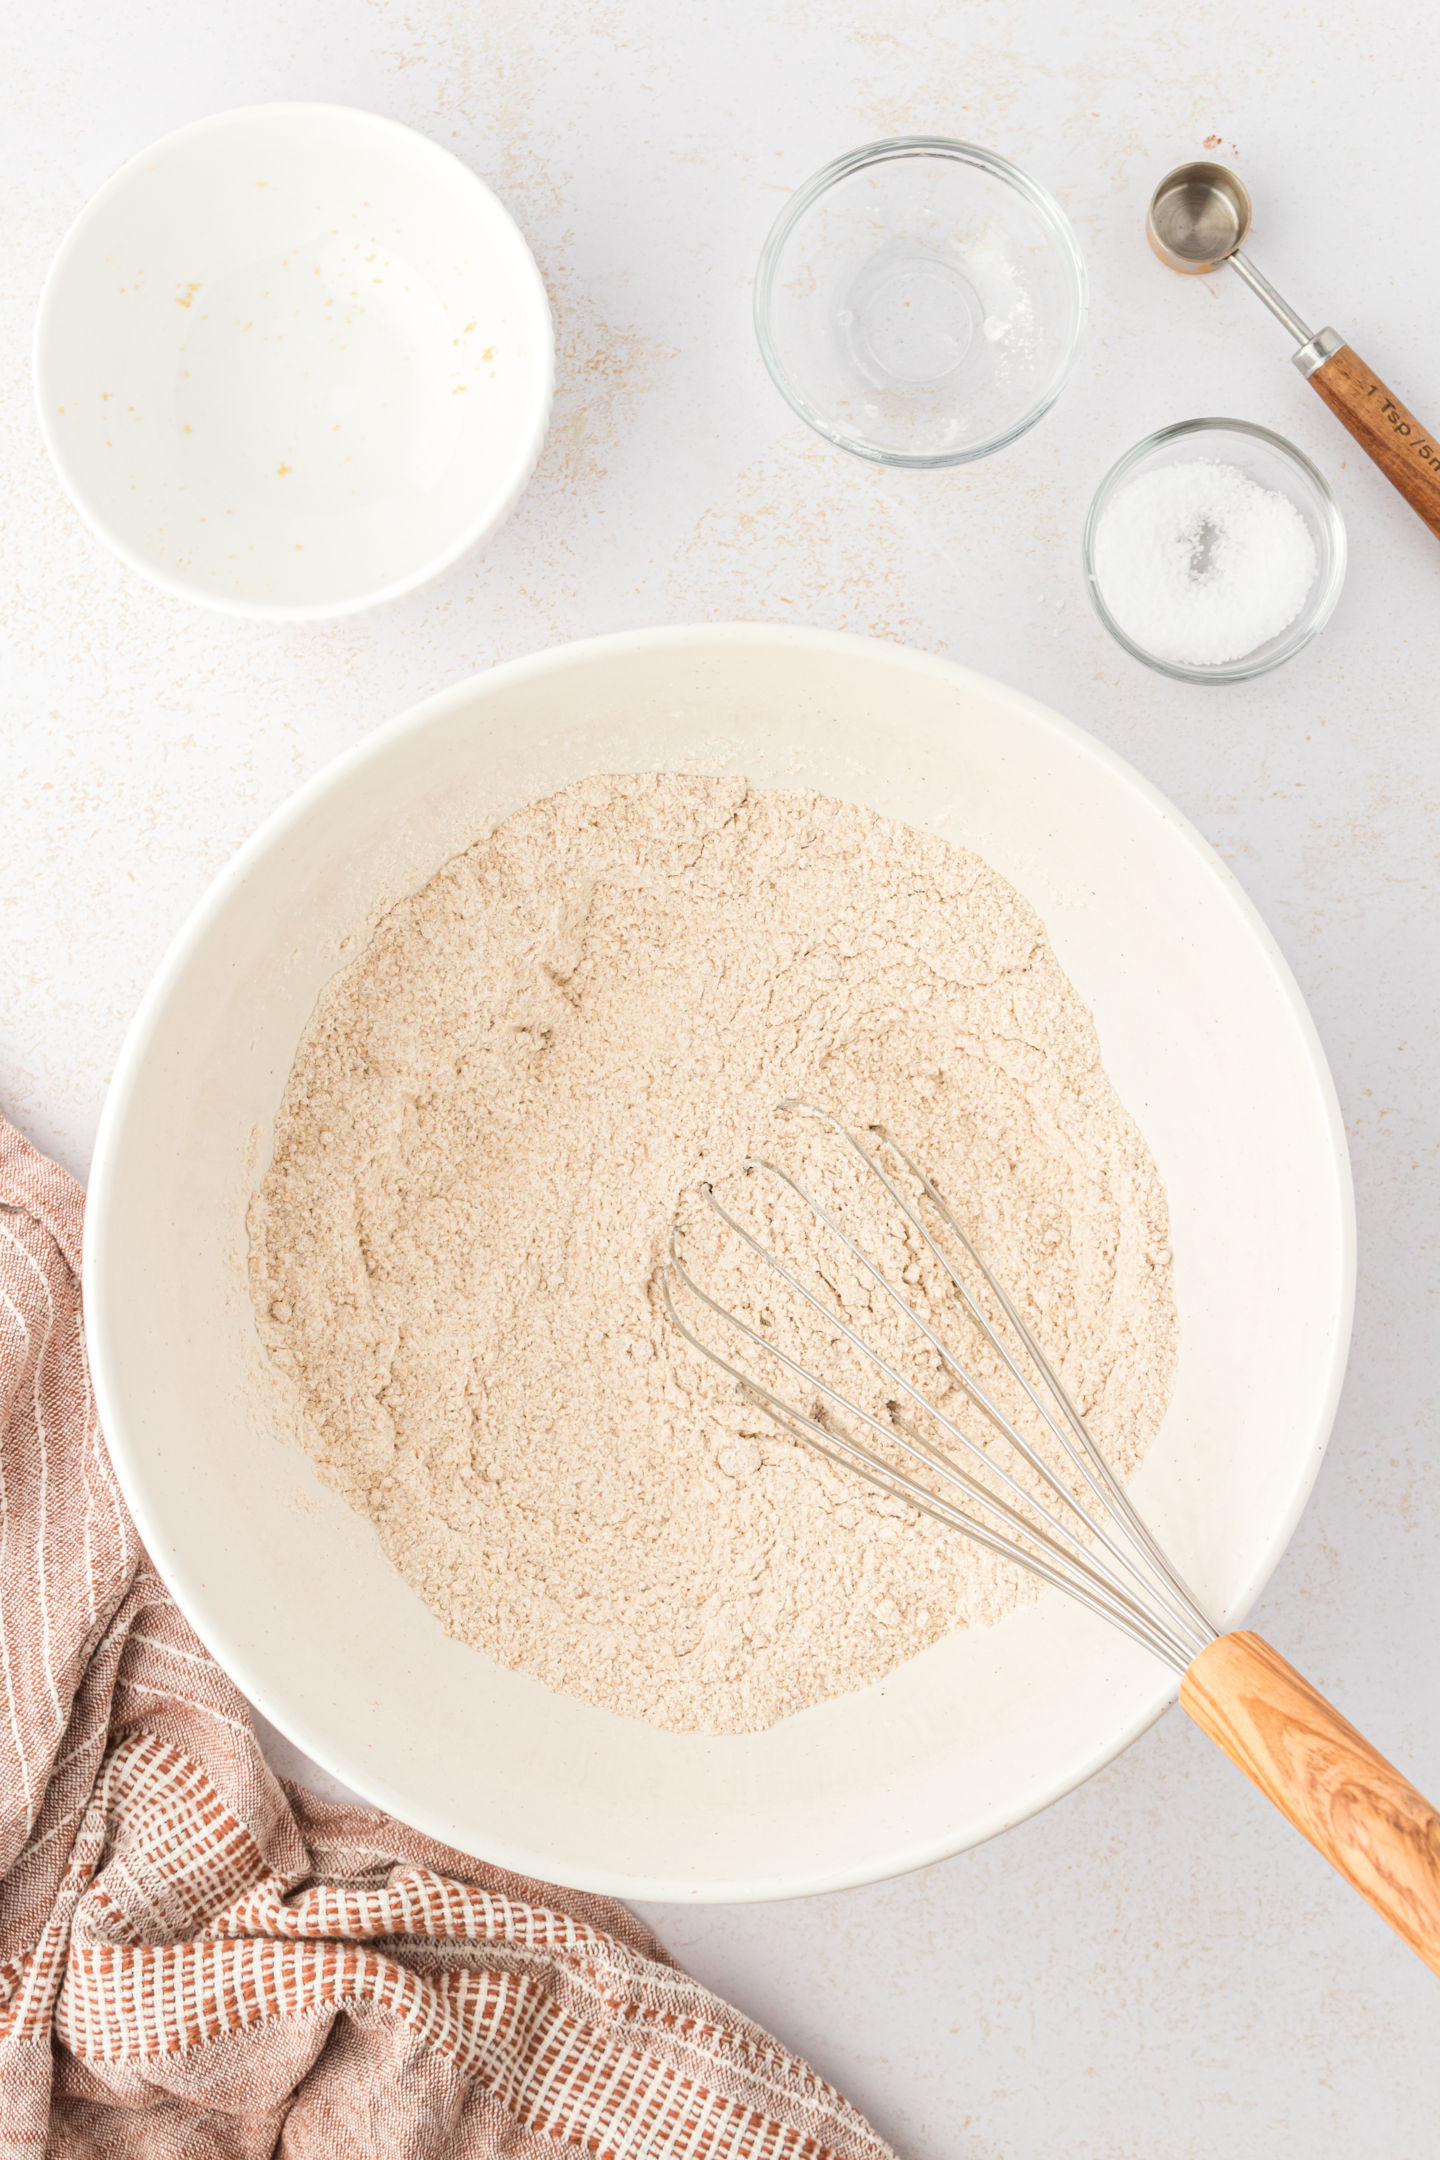 walnut bread flour mixture in a bowl with a whisk